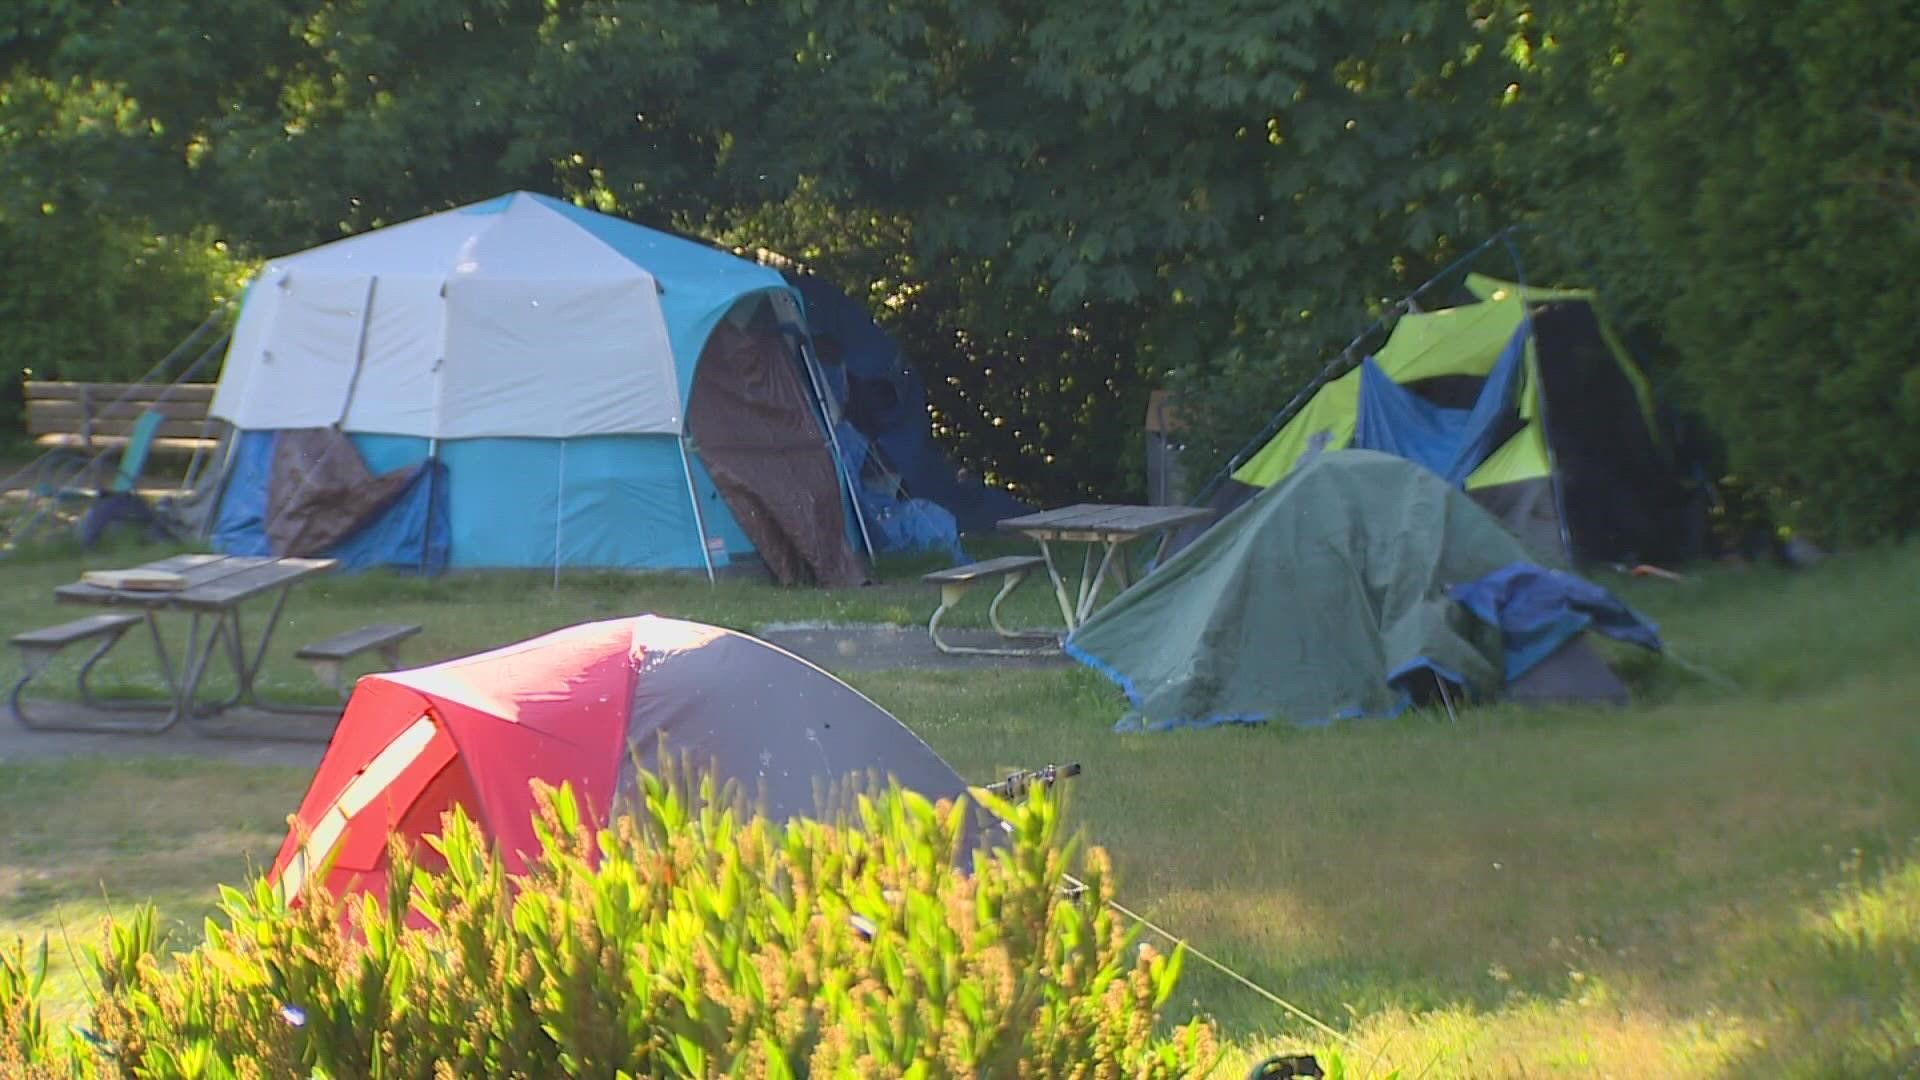 An encampment near Broadview Thomson K-8 in North Seattle won't be cleared before students return to class Sept. 1.